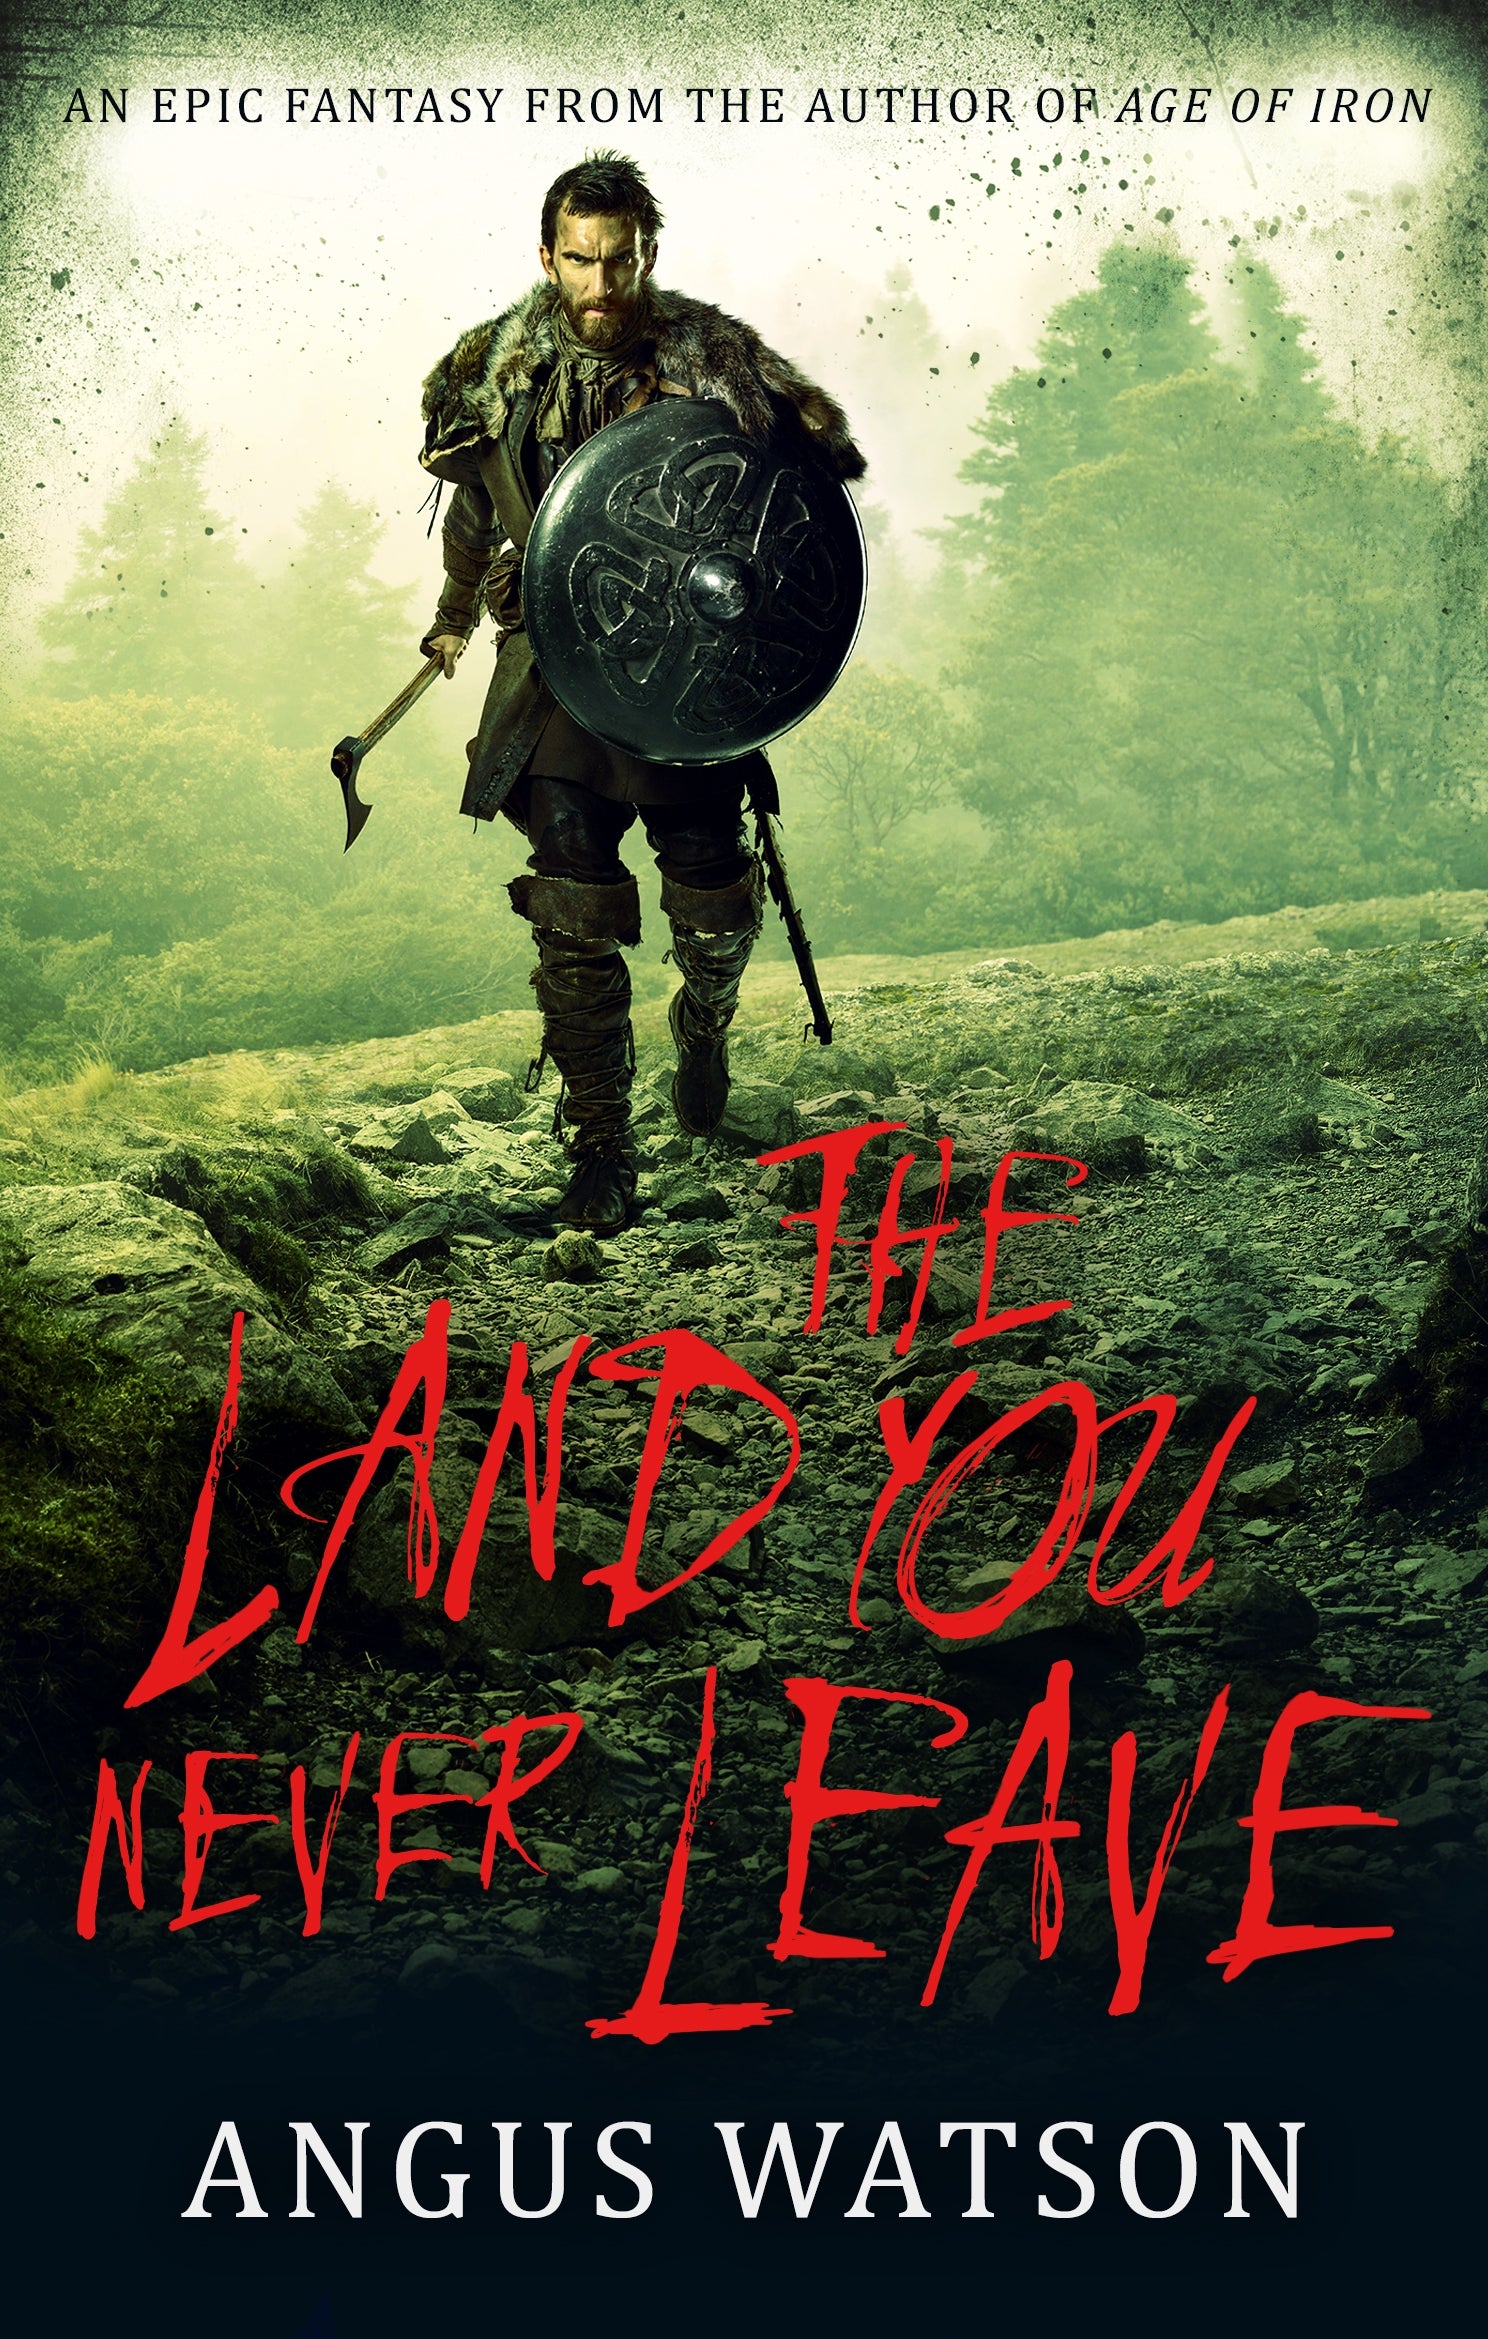 The Land You Never Leave by Angus Watson